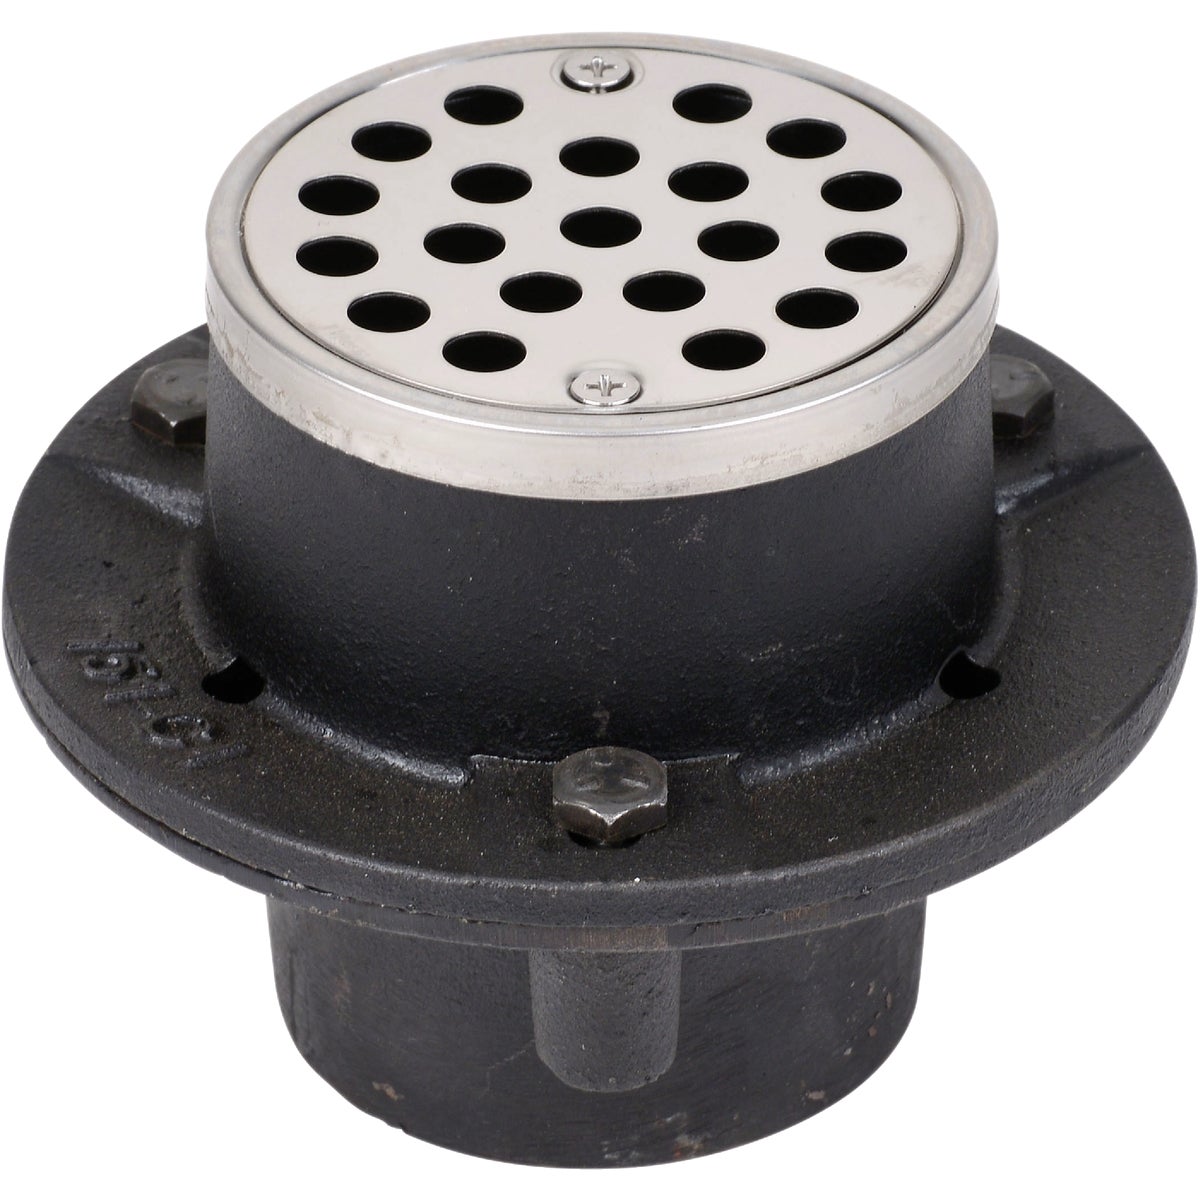 Oatey 2 In. Cast Iron No-Calk Shower Drain with 3-1/4 In. Stainless Steel Strainer